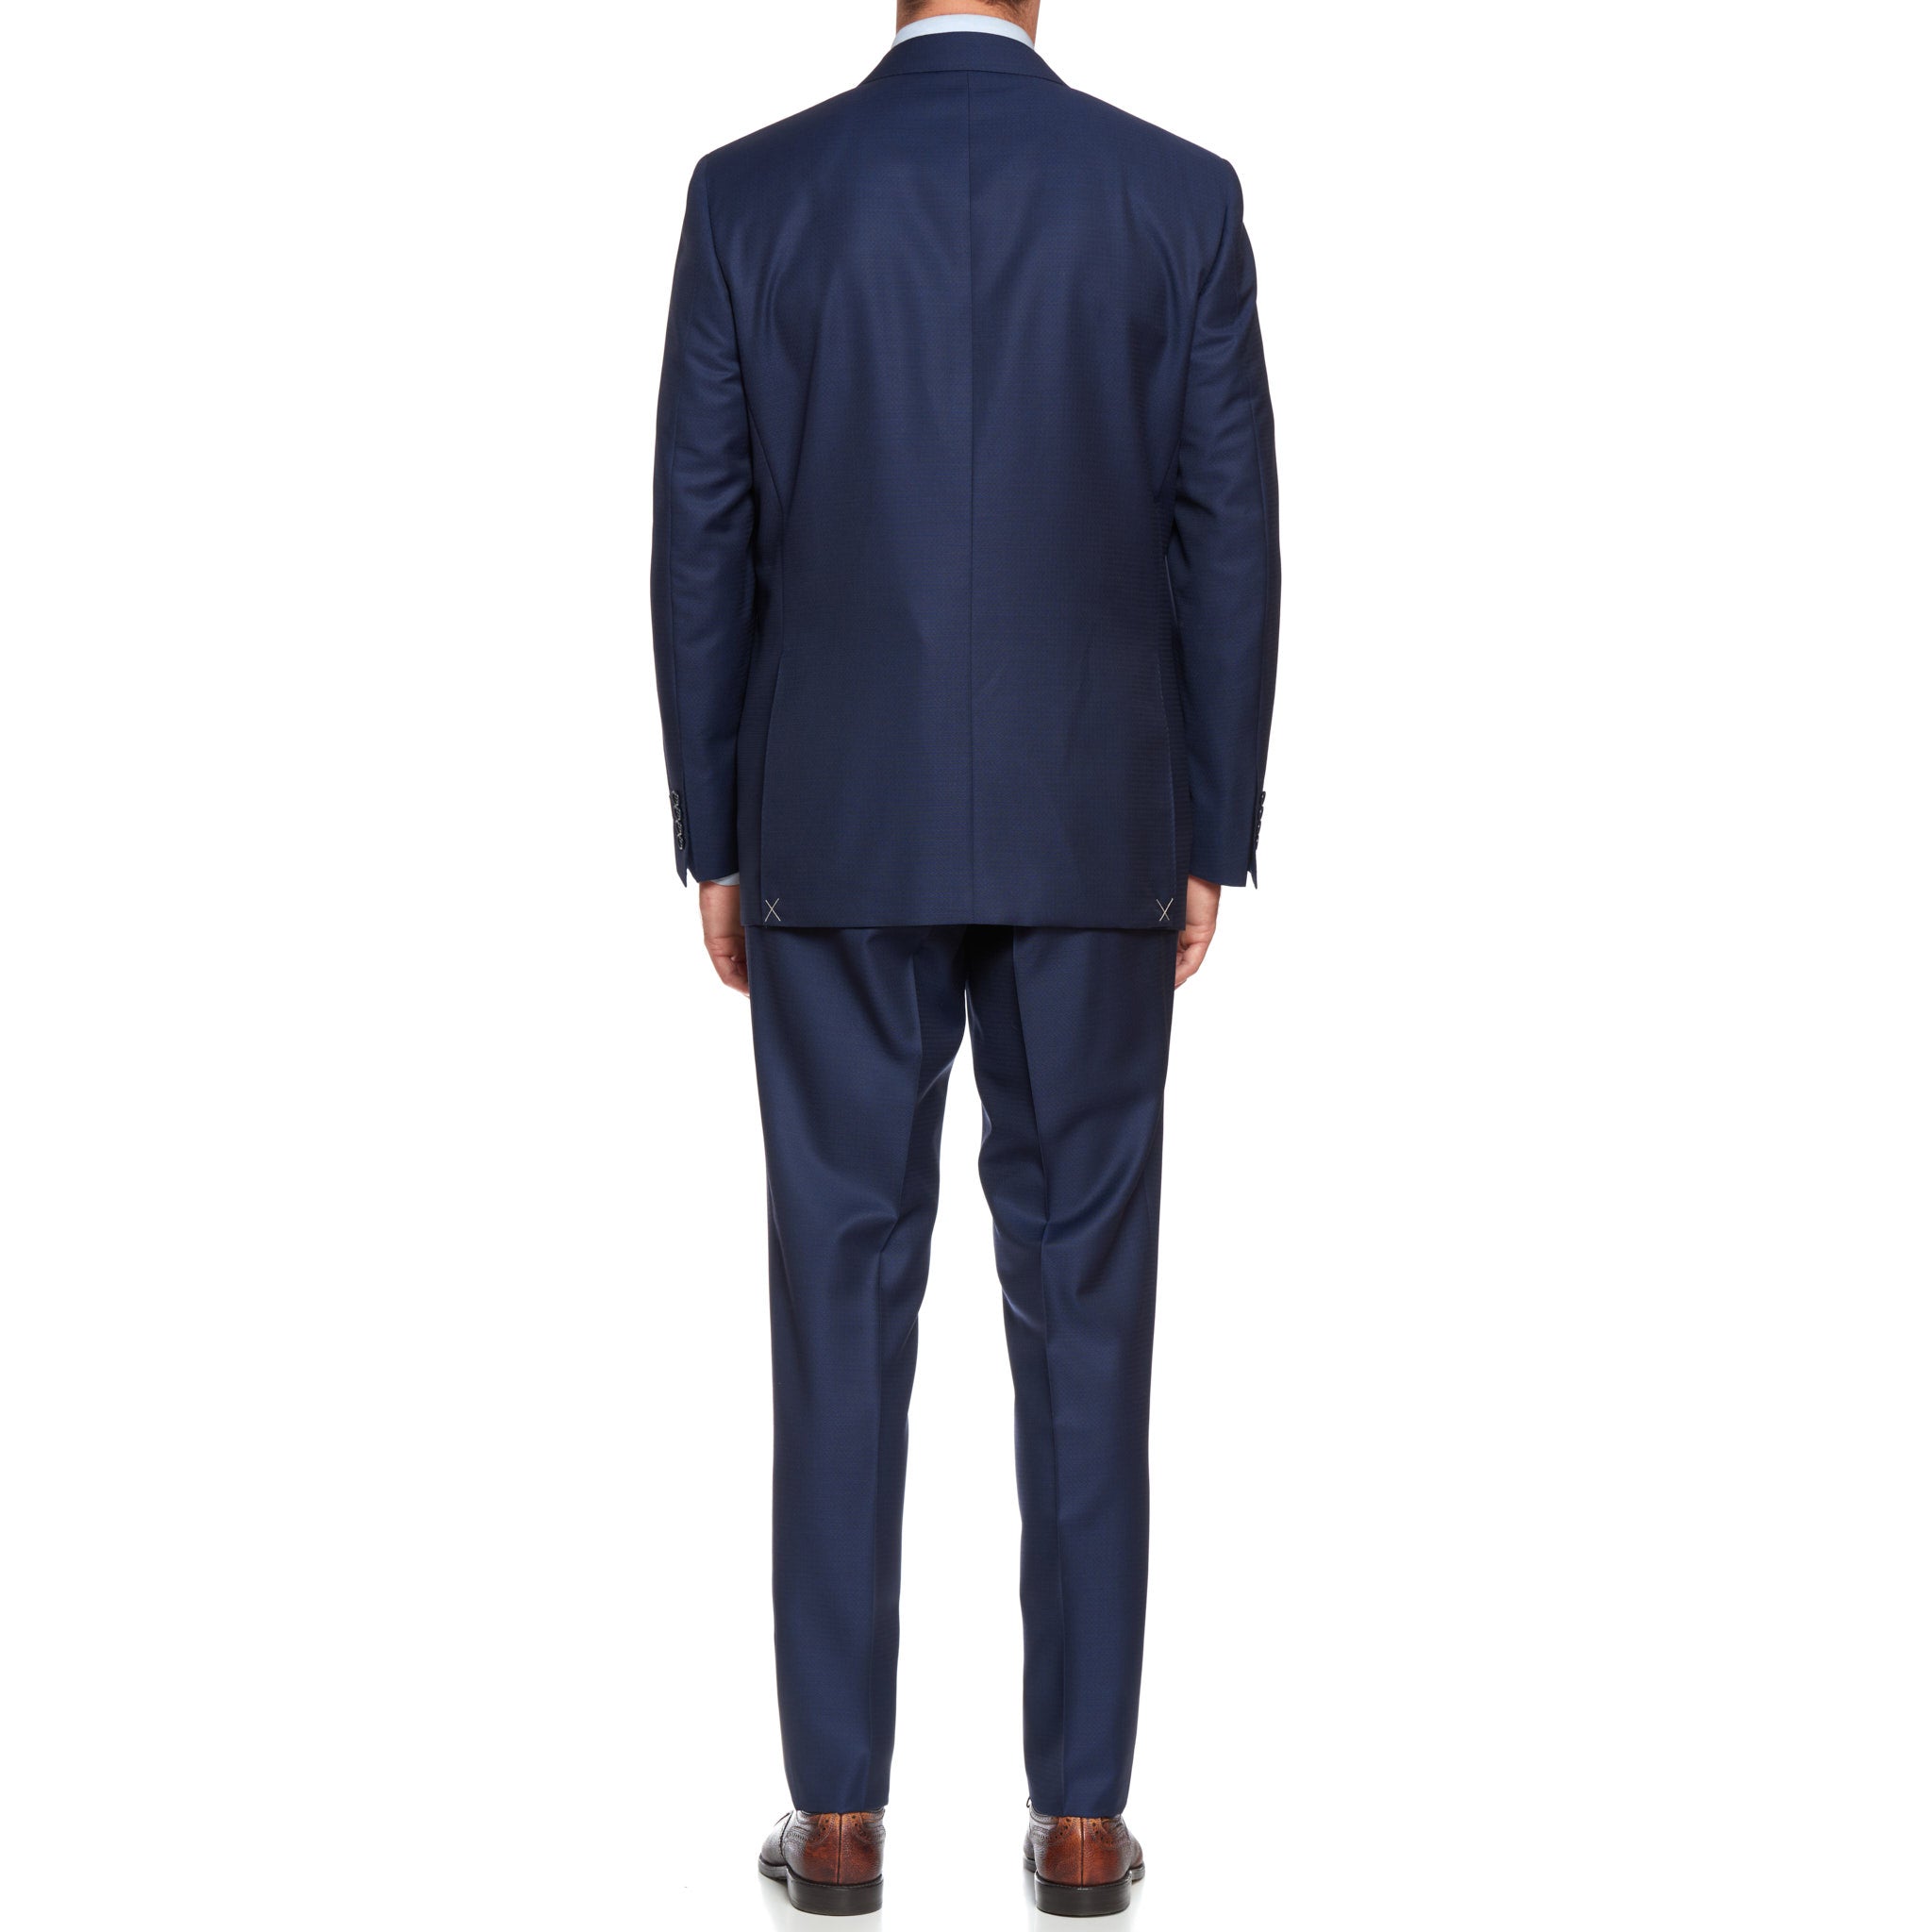 CANALI 1934 "Travel" Navy Blue Jacquard Wool-Mohair Suit EU 56 NEW US 46 Current Model CANALI